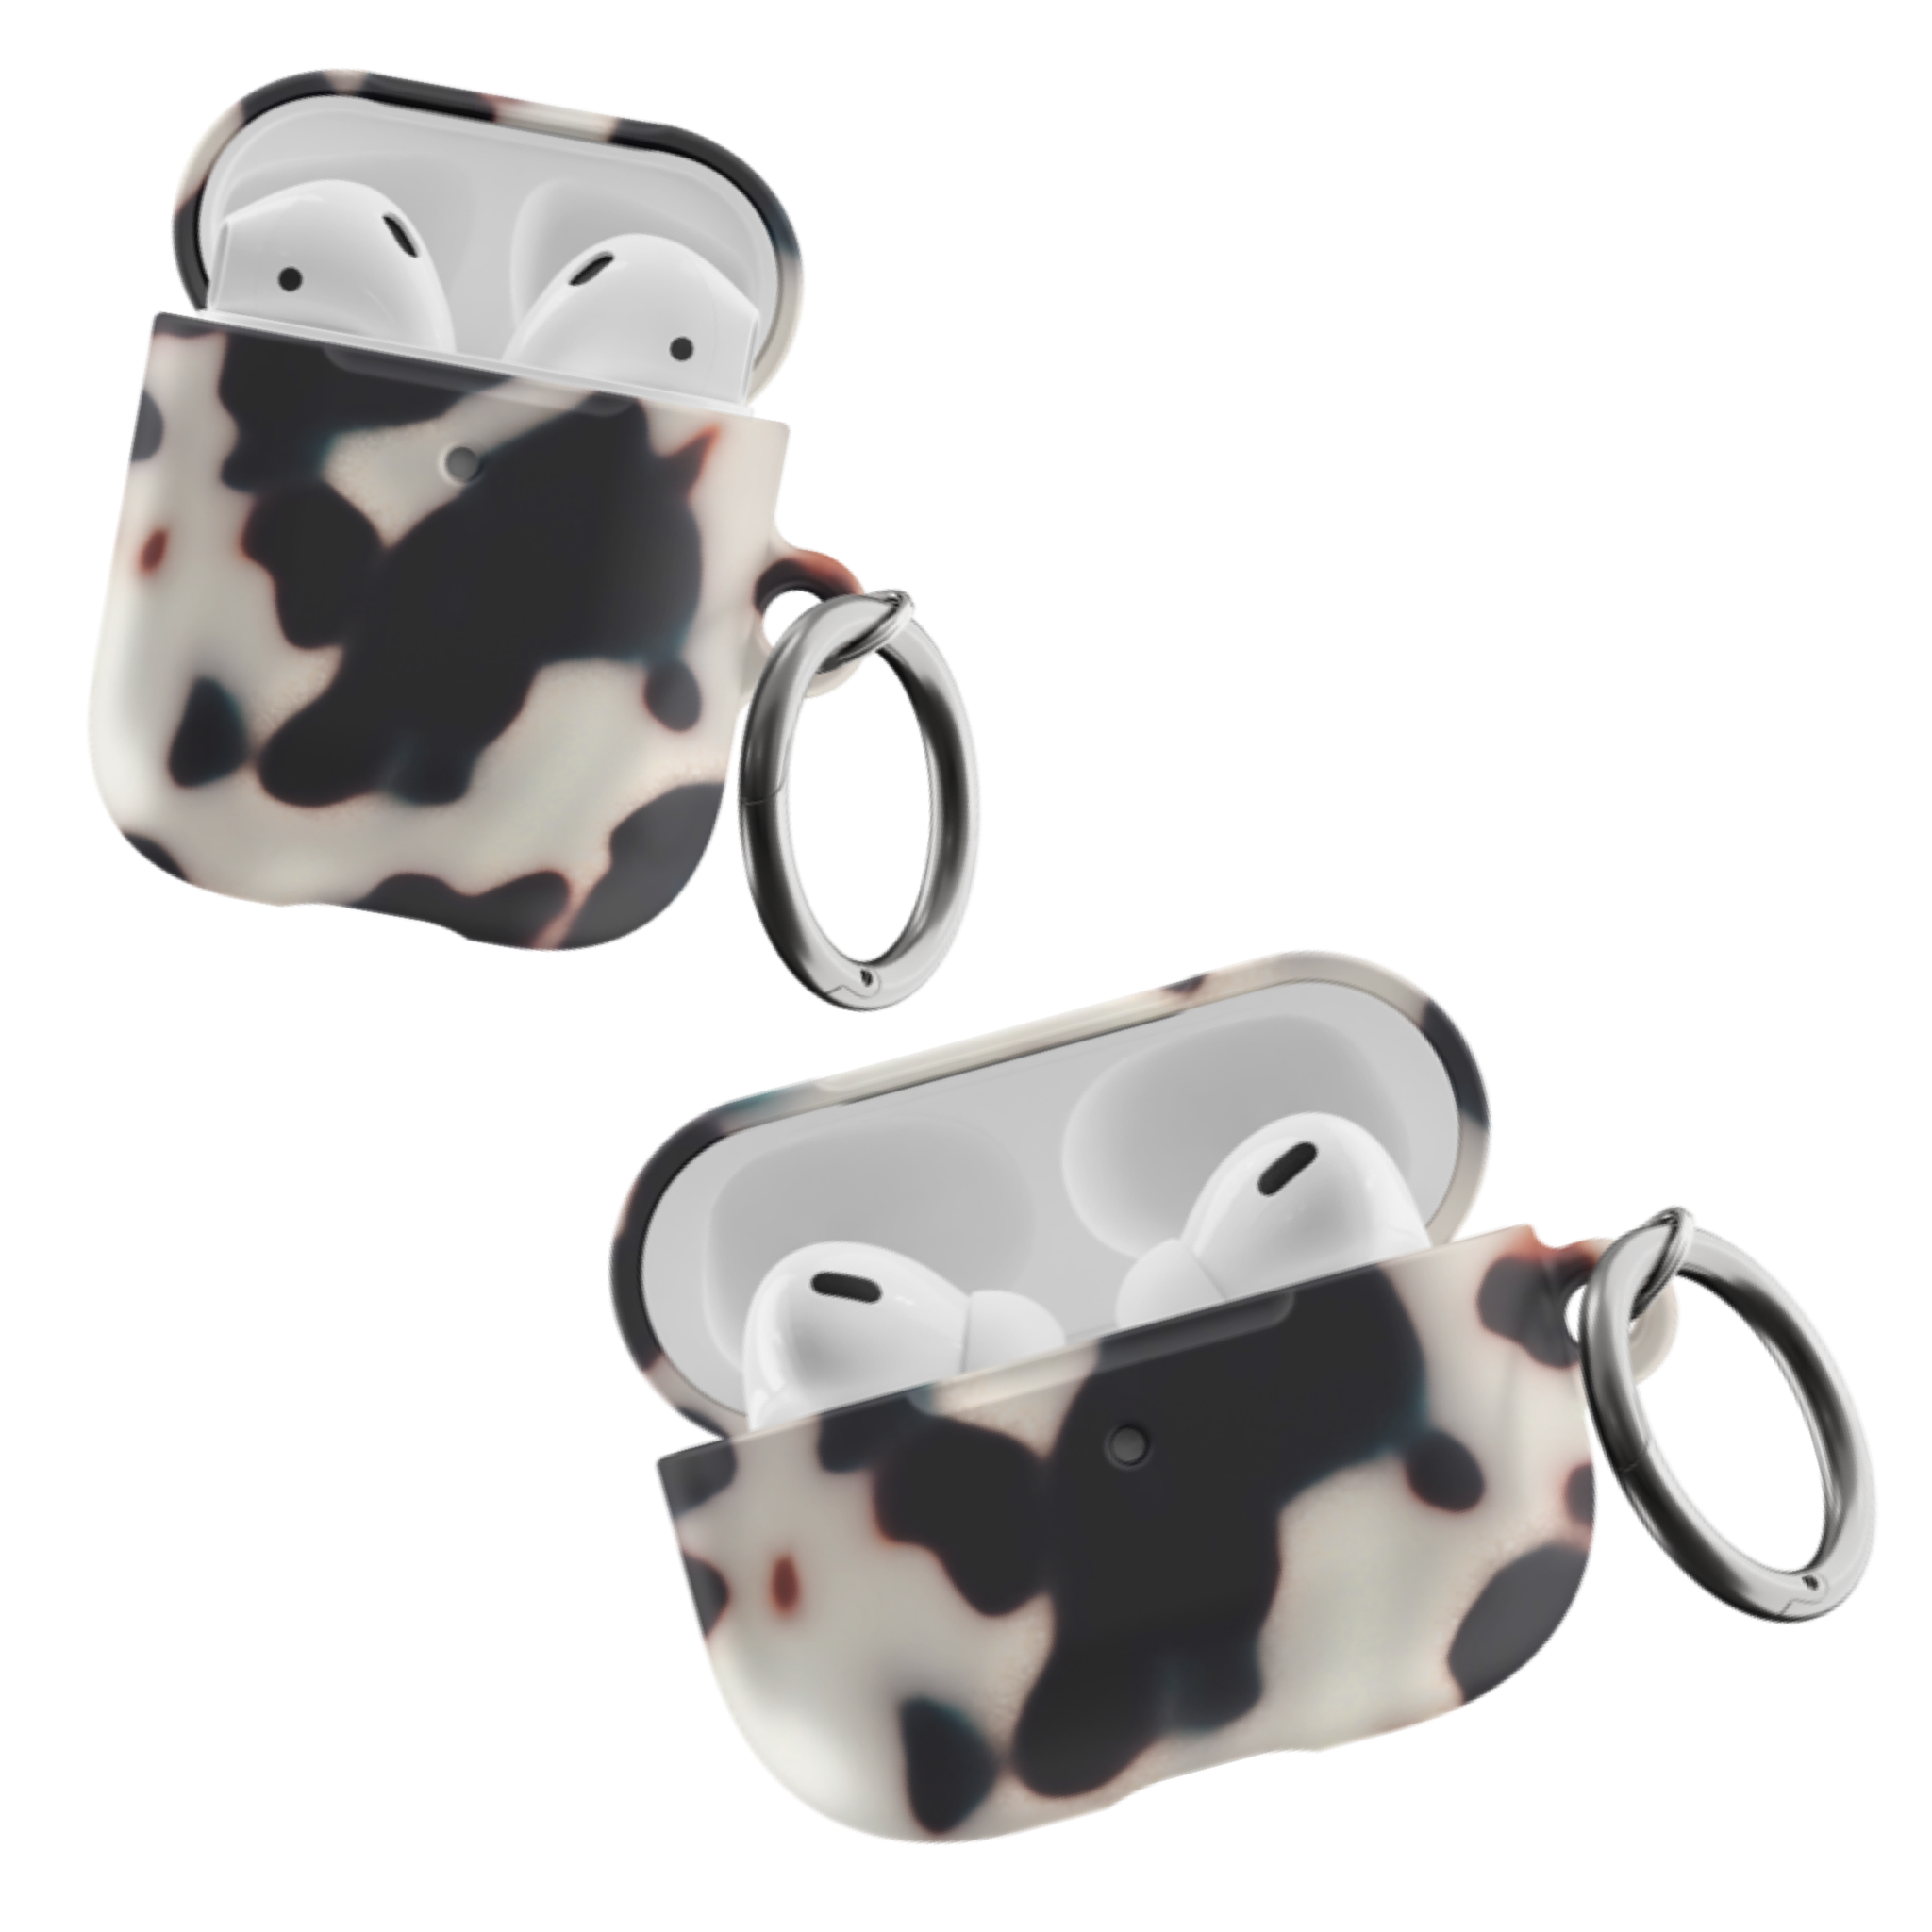 Creamy Tortoise Shell Airpods Case